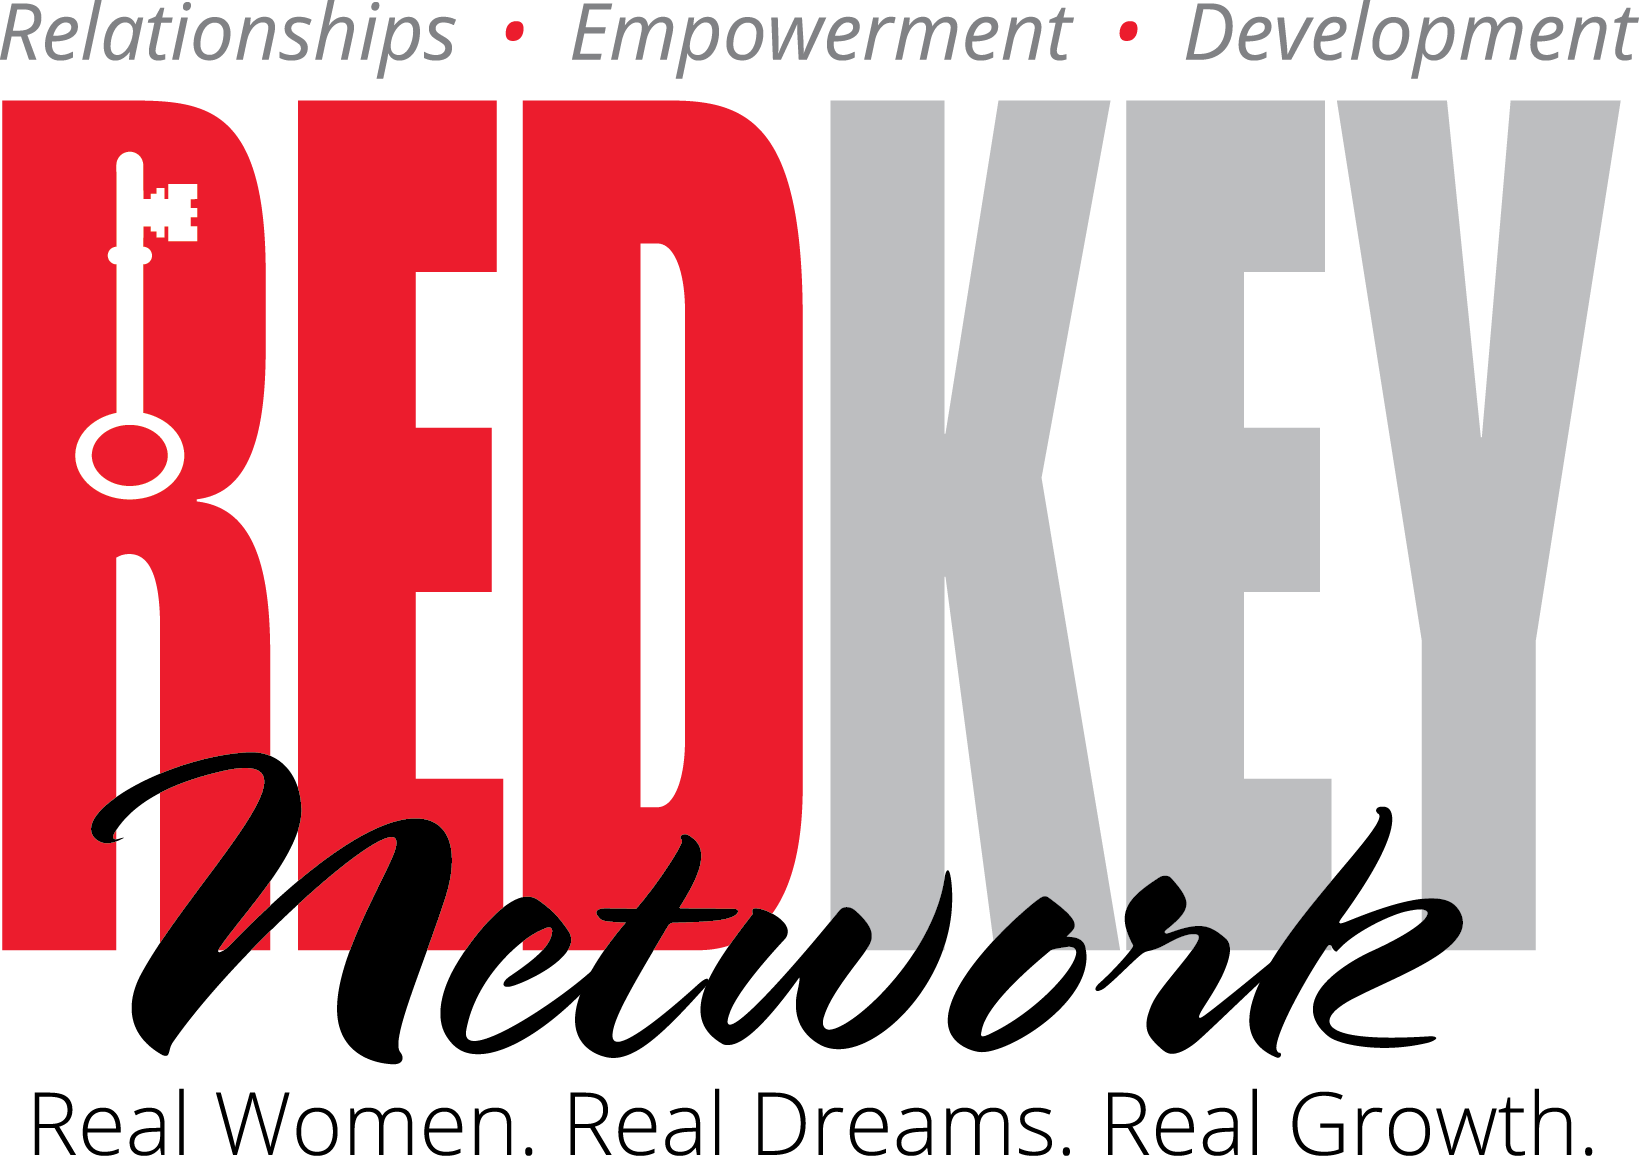 Profile with Red Oval Logo - Red Key Network - Member public profile